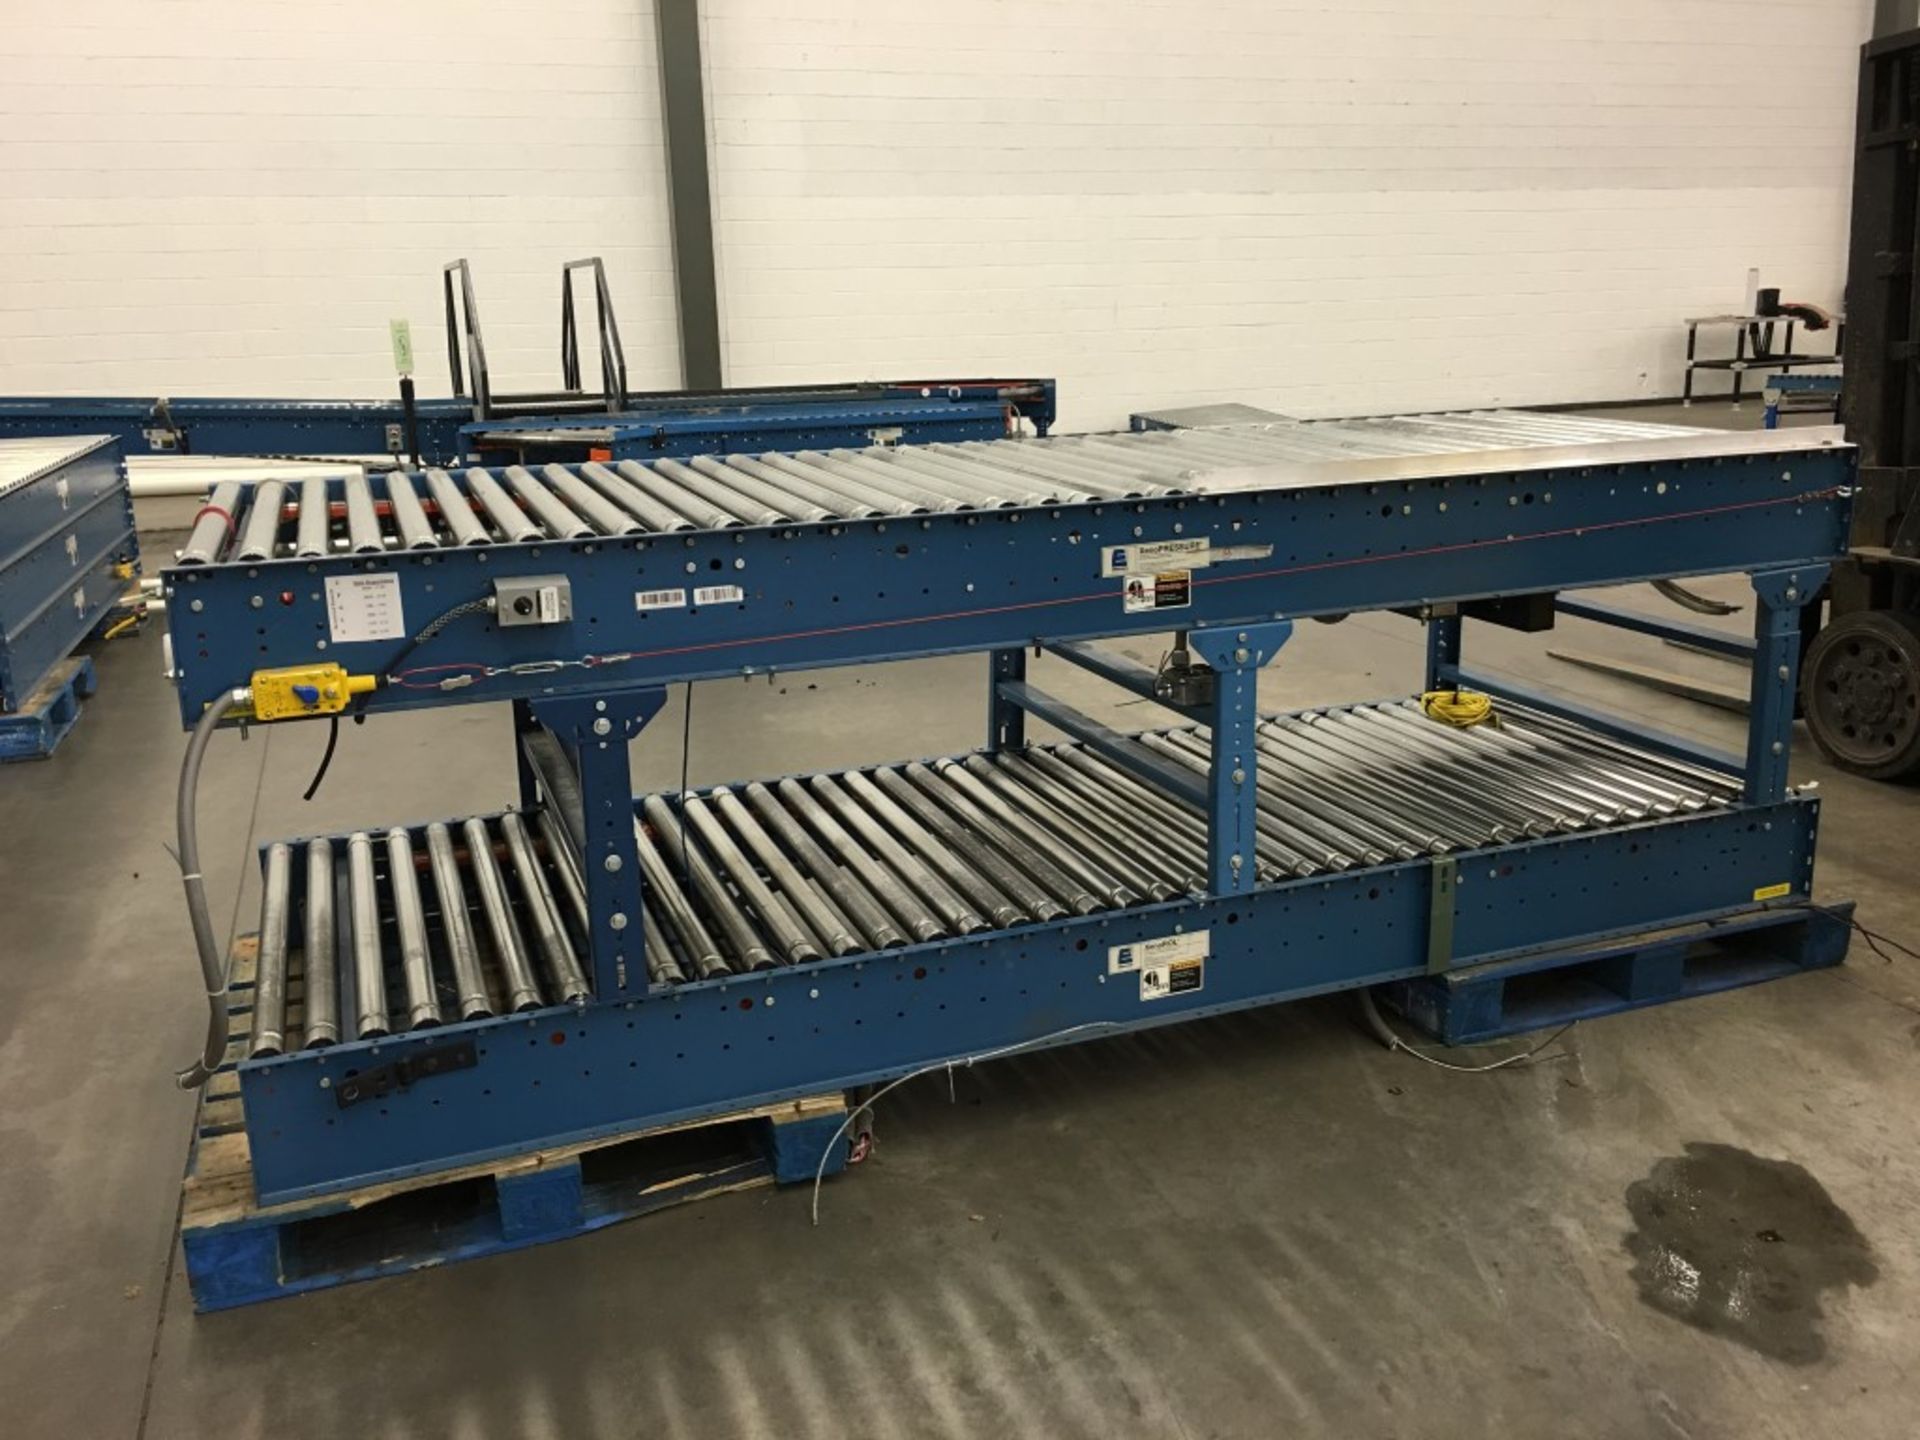 2002 XENOROL XR48 20 FT LONG X 42" WIDE, LINE-SHAFT-DRIVEN LIVE ROLLER CONVEYOR / POWERED CONVEYOR - Image 2 of 8